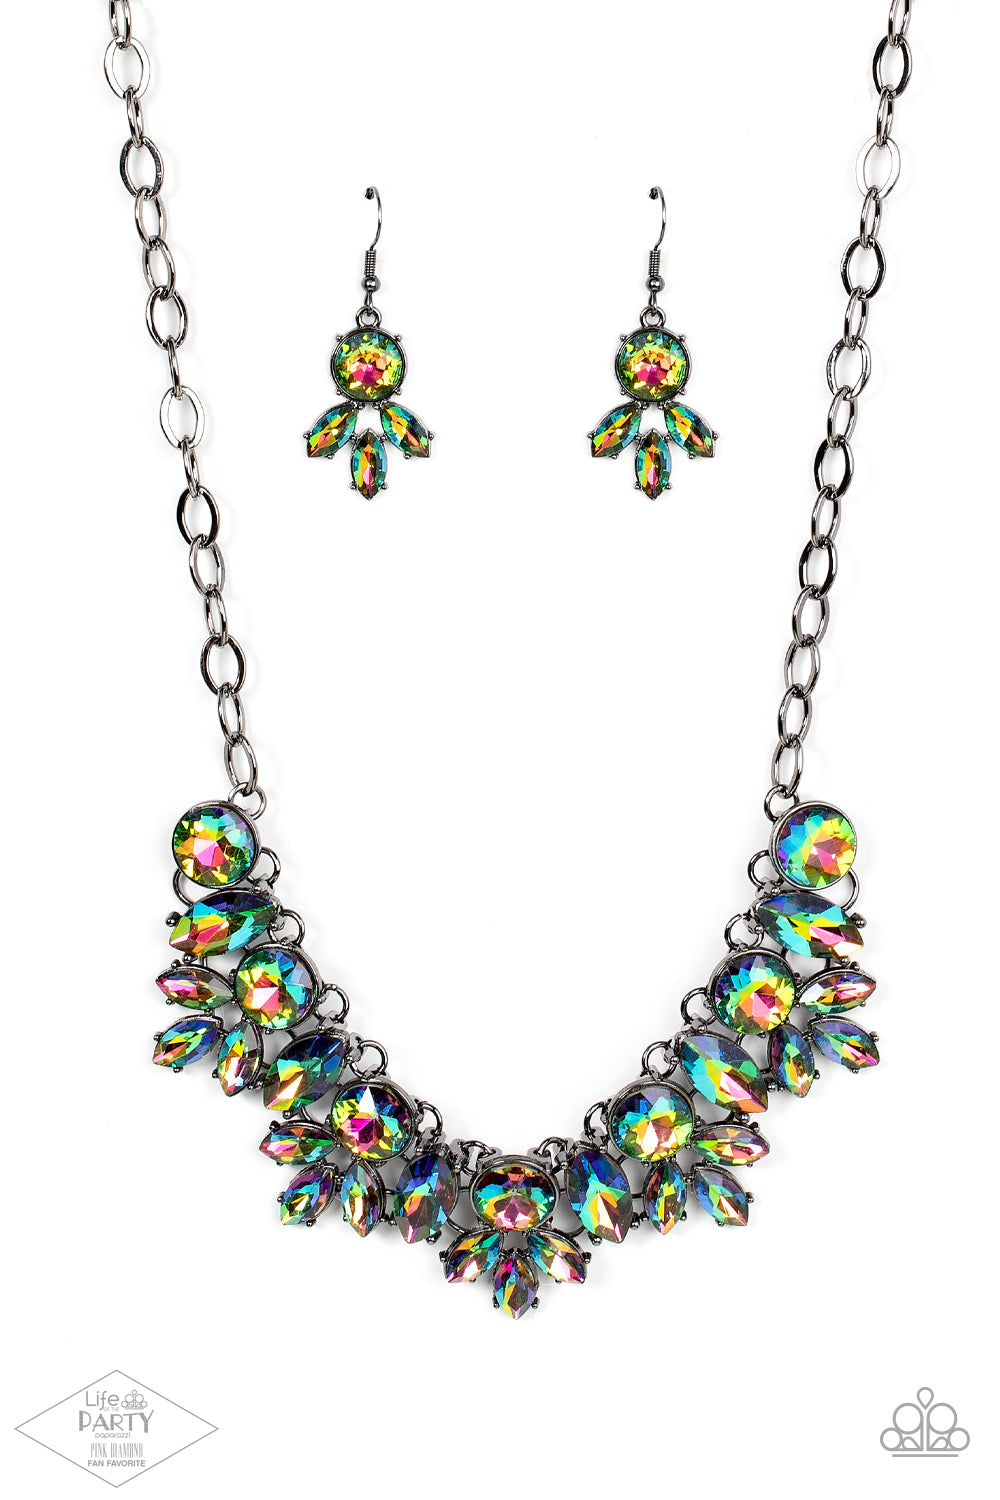 Combustible Charisma Multi Necklace - Paparazzi Accessories  A blinding series of oversized round and marquise style oil spill rhinestones dramatically link below the collar, creating a show-stopping statement piece. Features an adjustable clasp closure.  Sold as one individual necklace. Includes one pair of matching earrings. This Fan Favorite is back in the spotlight at the request of our 2021 Life of the Party member with Pink Diamond Access, Jennifer V.